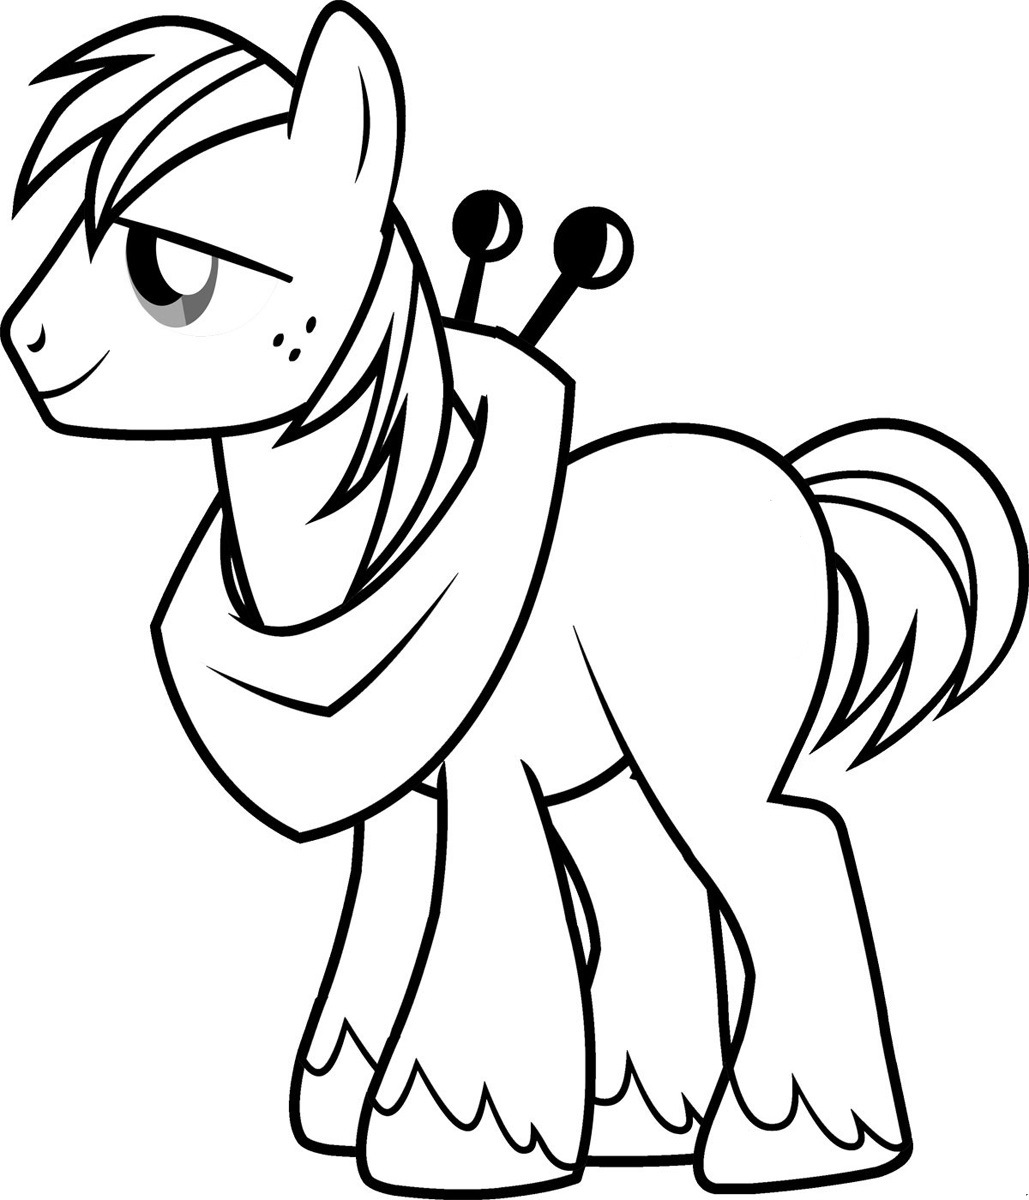 Ponies from Ponyville coloring pages free printable